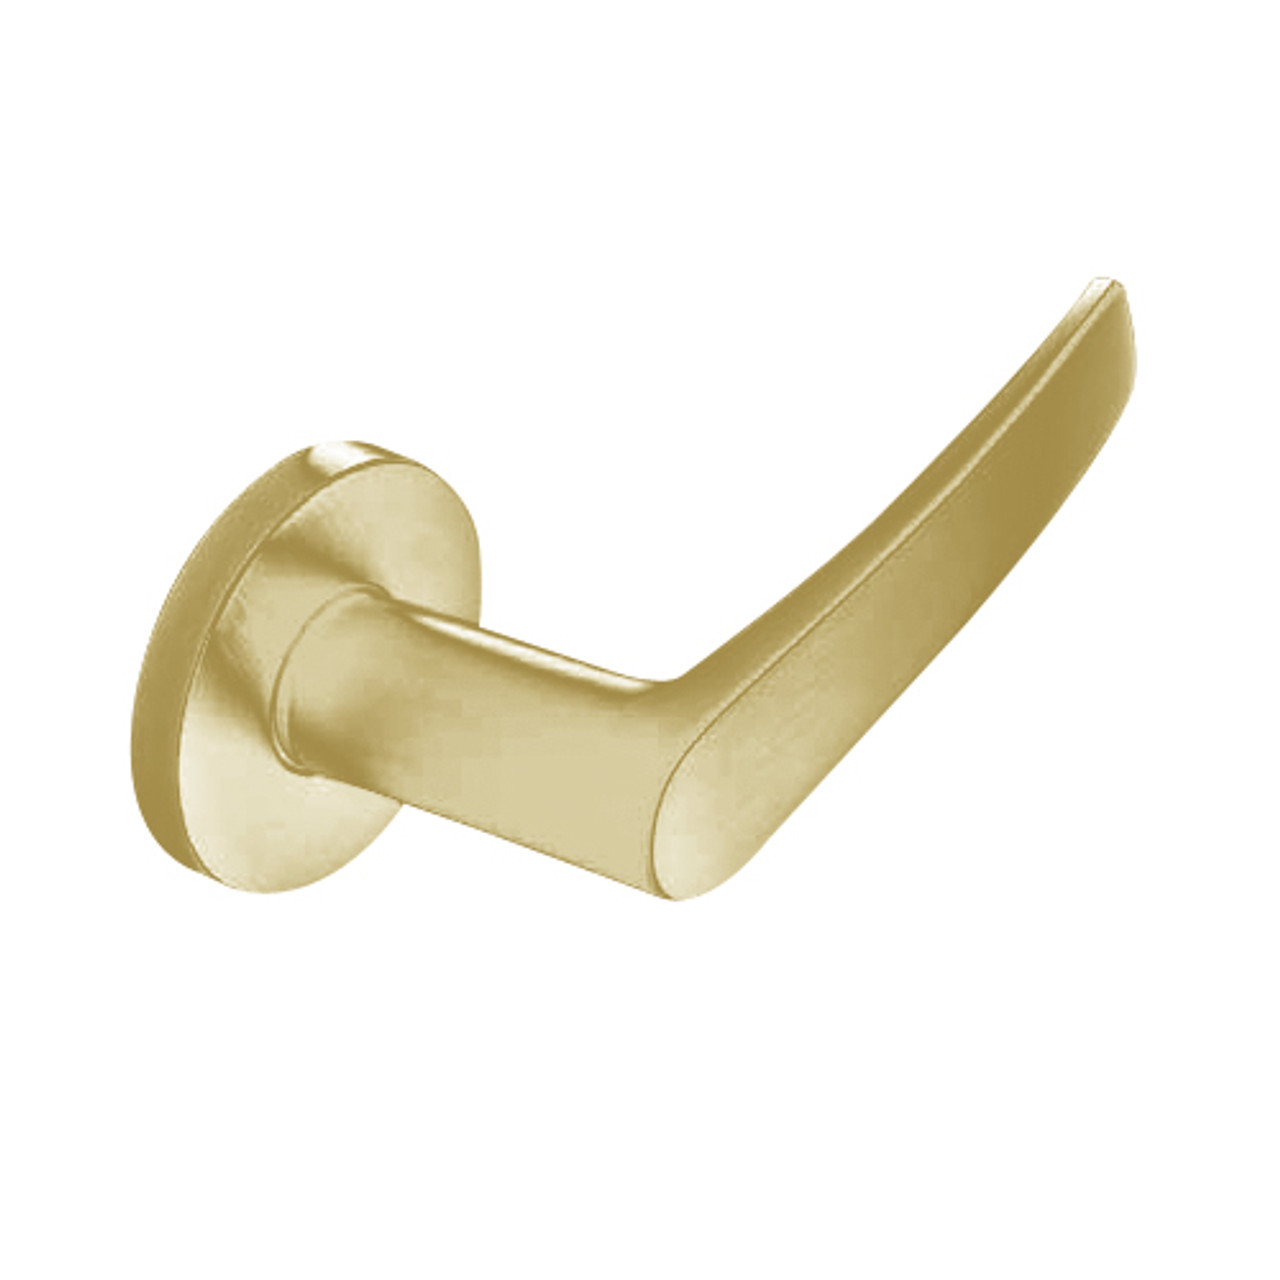 ML2003-ASB-606 Corbin Russwin ML2000 Series Mortise Classroom Locksets with Armstrong Lever in Satin Brass